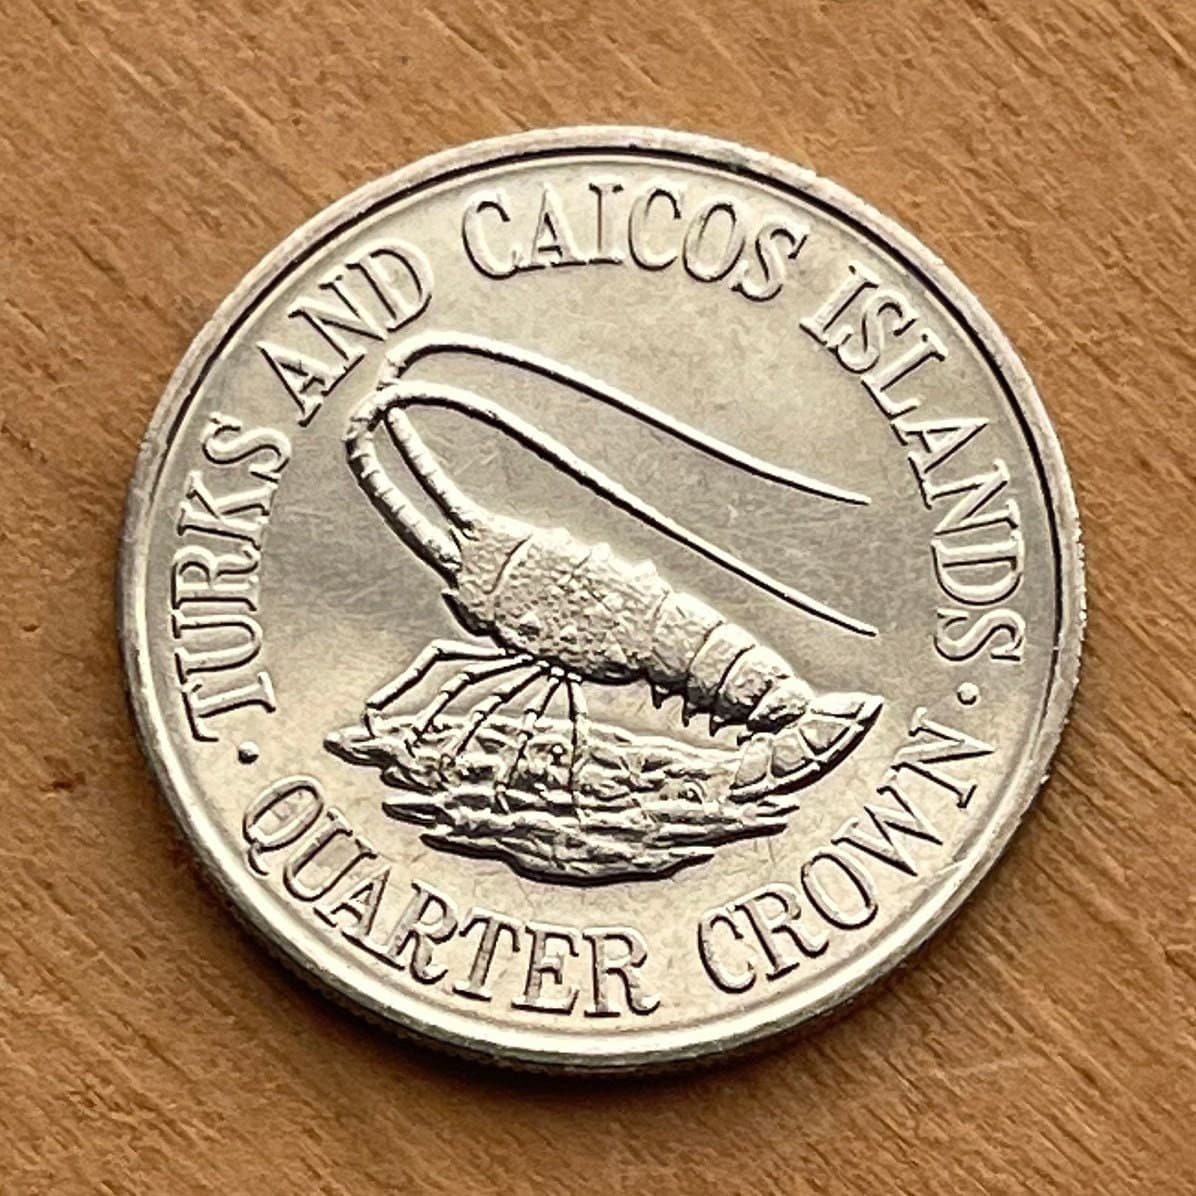 Spiny Lobster Quarter Crown Turks and Caicos Authentic Coin Money for Jewelry and Craft Making (1981) (Sea Crayfish) (Langusta)